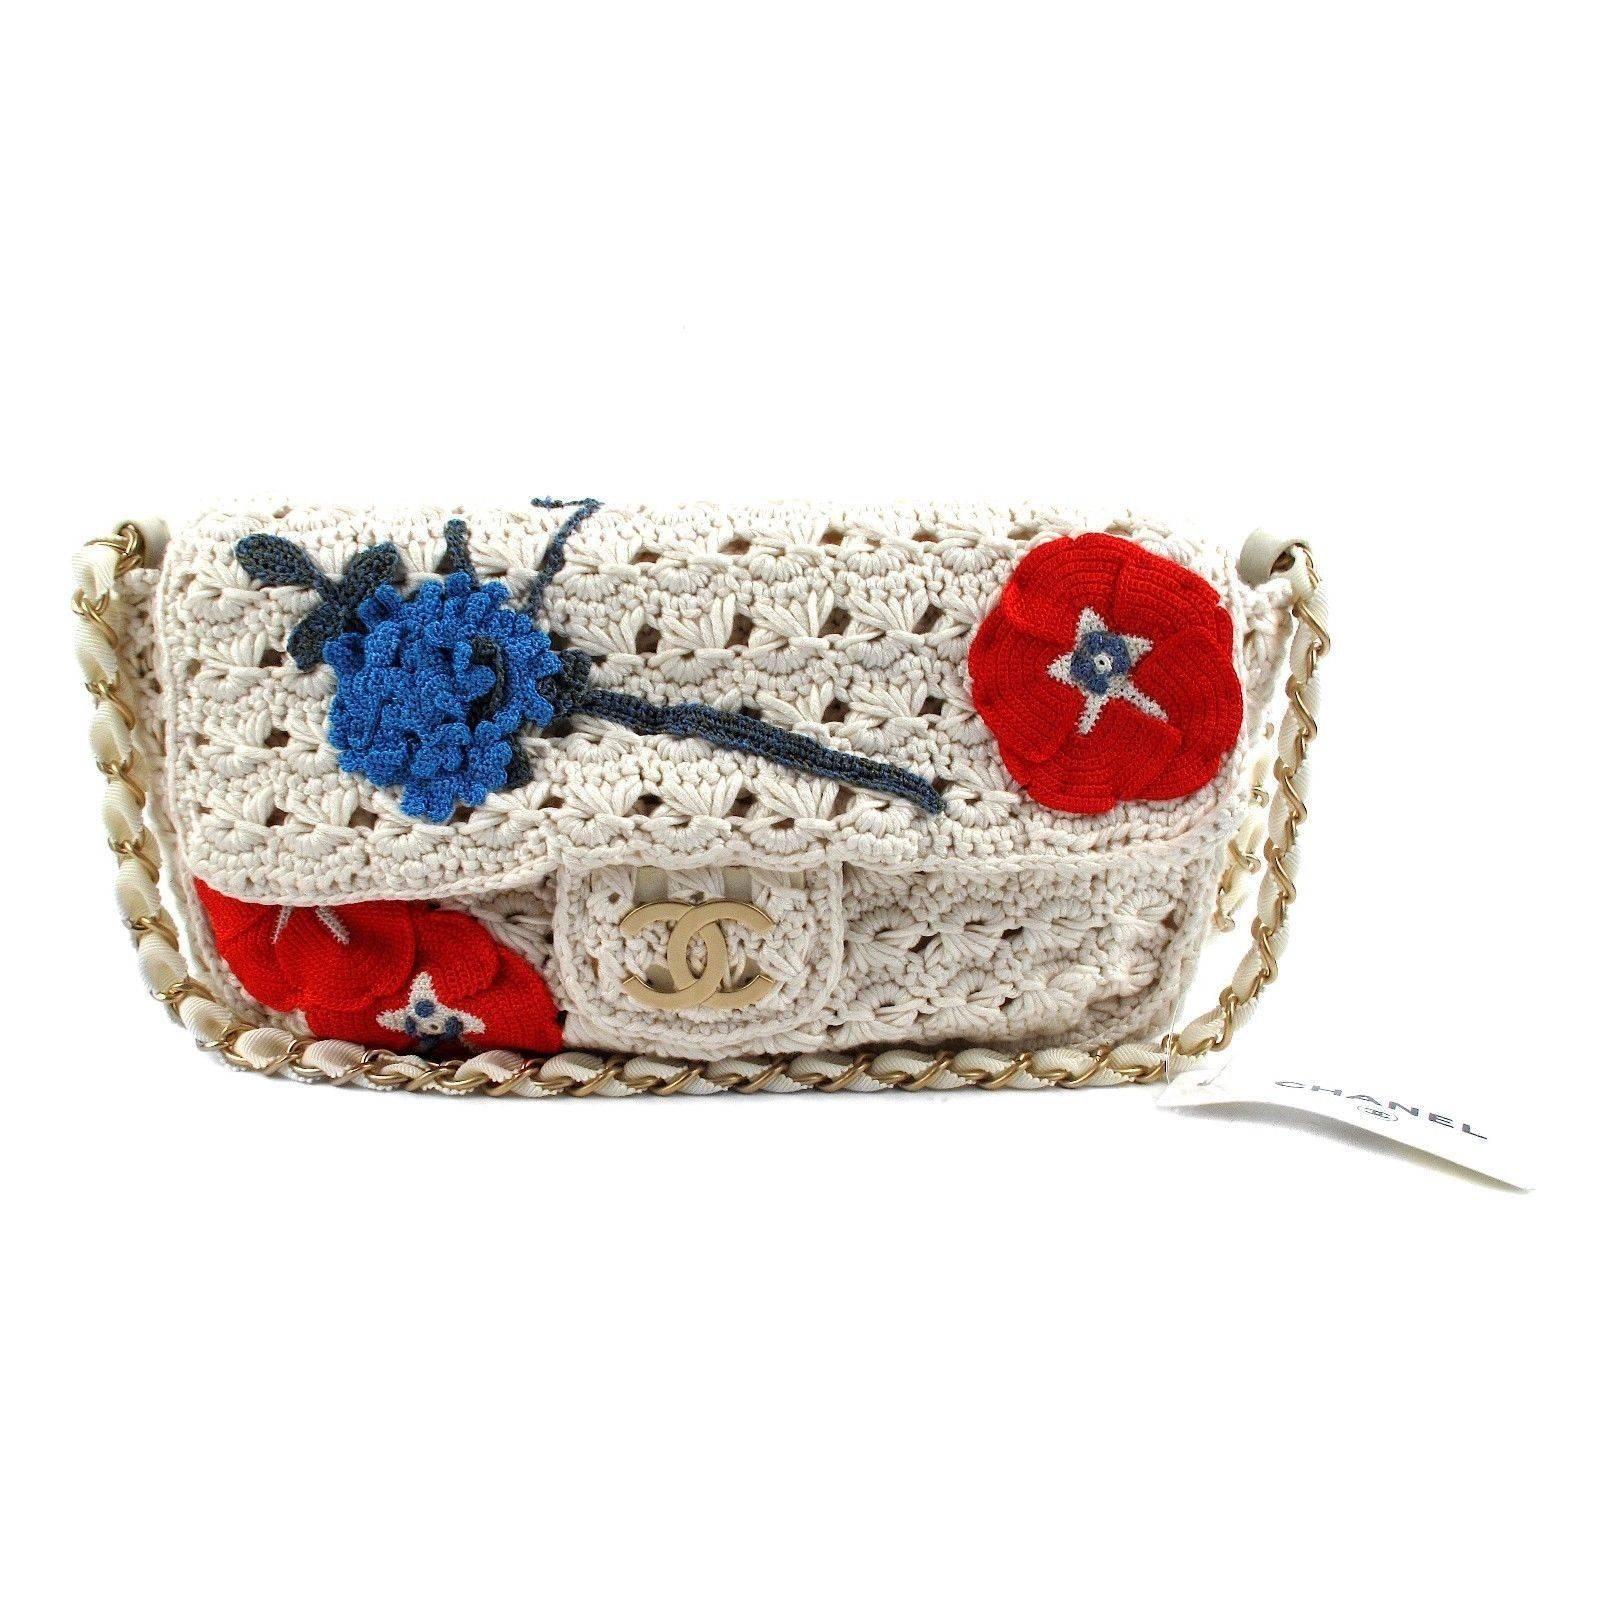 Brand NEW!

Chanel - Crocheted Knit Camellia Runway Bag

Retail: $4500.00

Color: White / Red / Blue

Material: Fabric - Suede

------------------------------------------------------------

Details:

- embroidered camellias